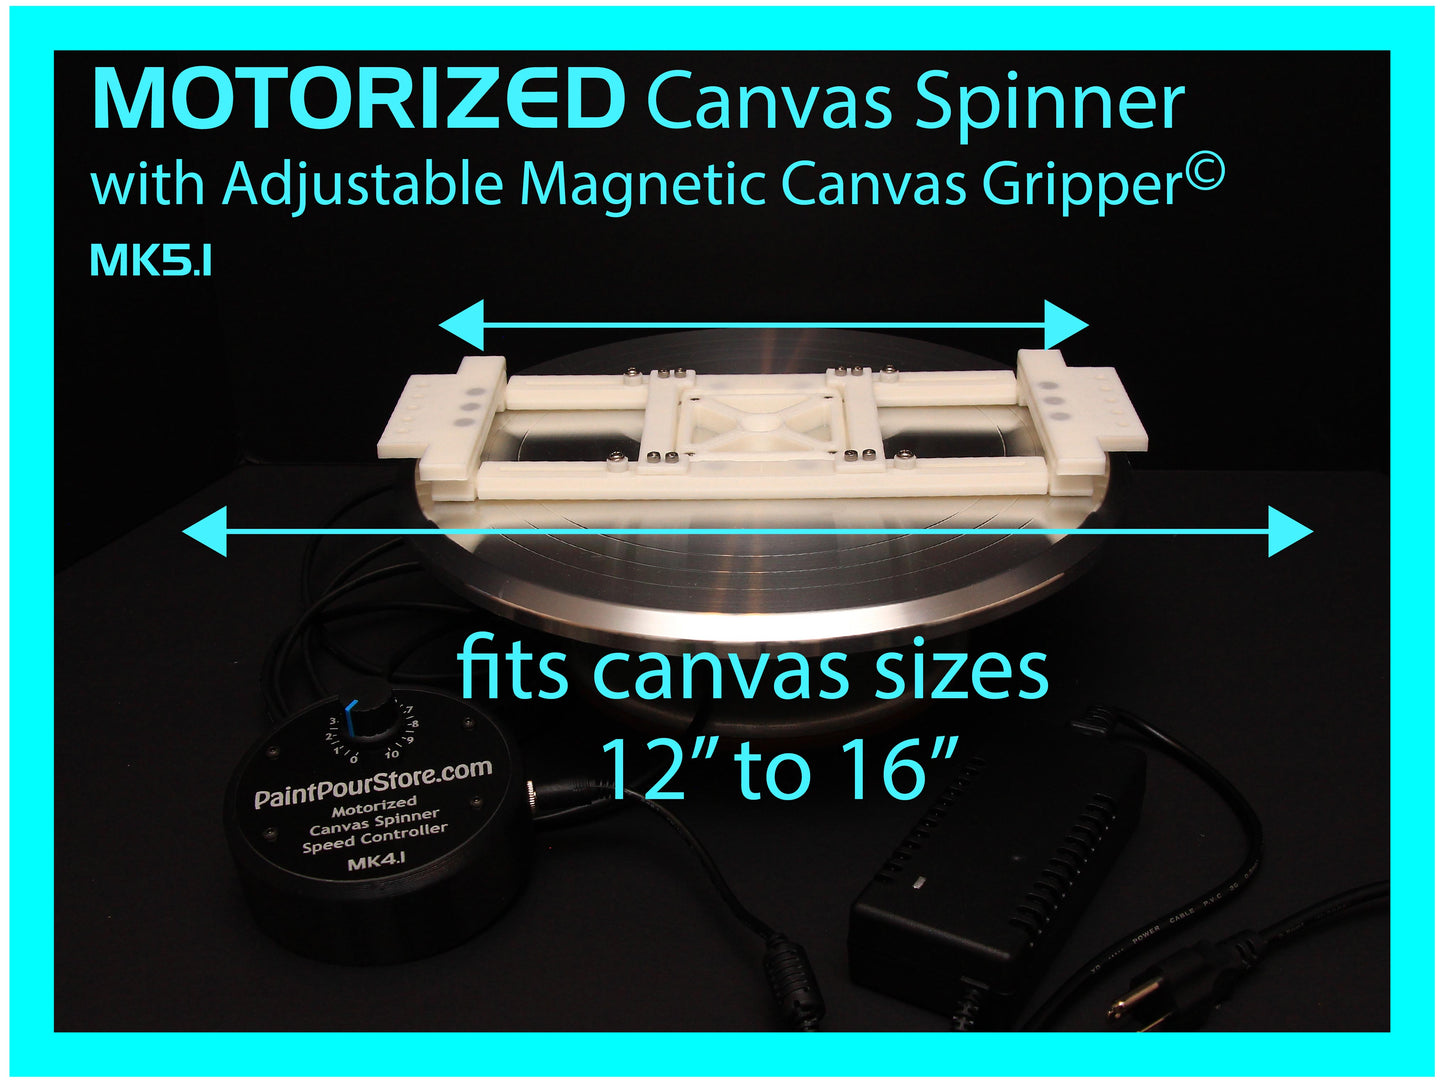 Motorized Canvas Spinner with Adjustable Magnetic Canvas Gripper Lazy Susan